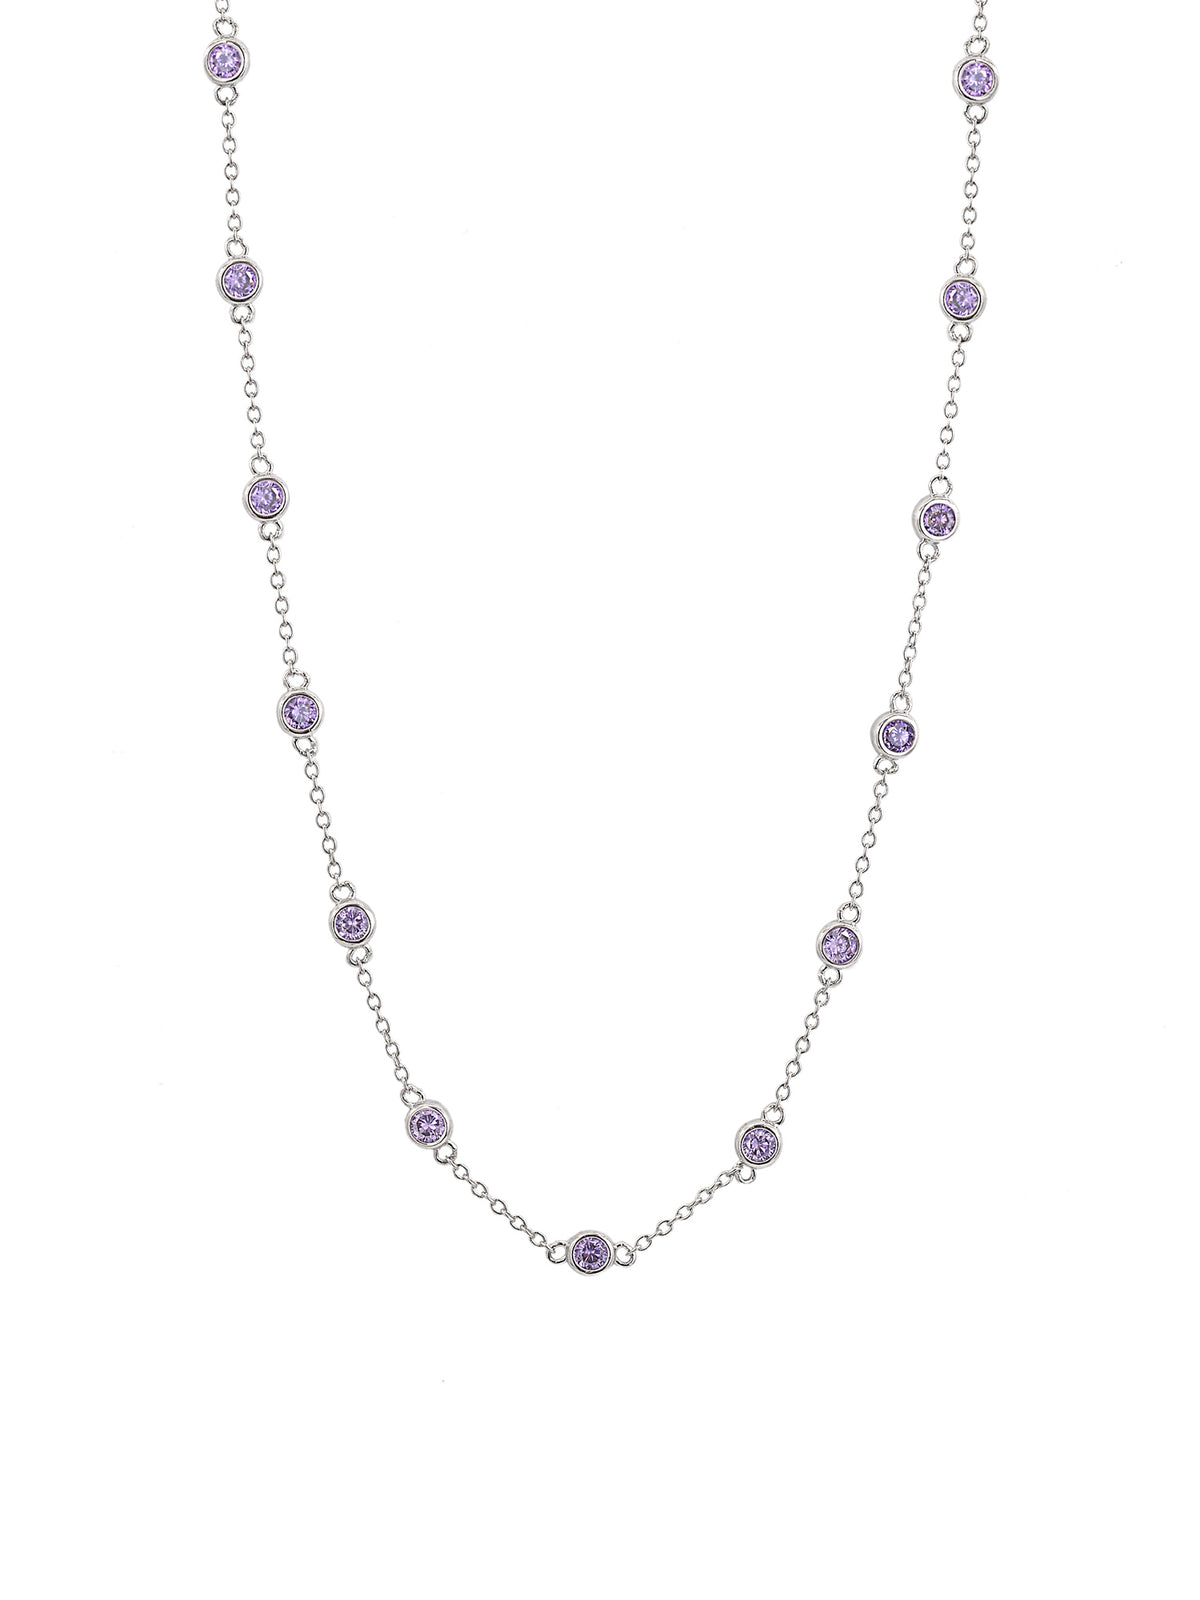 AMETHYST SILVER NECKLACE FOR WOMEN-4